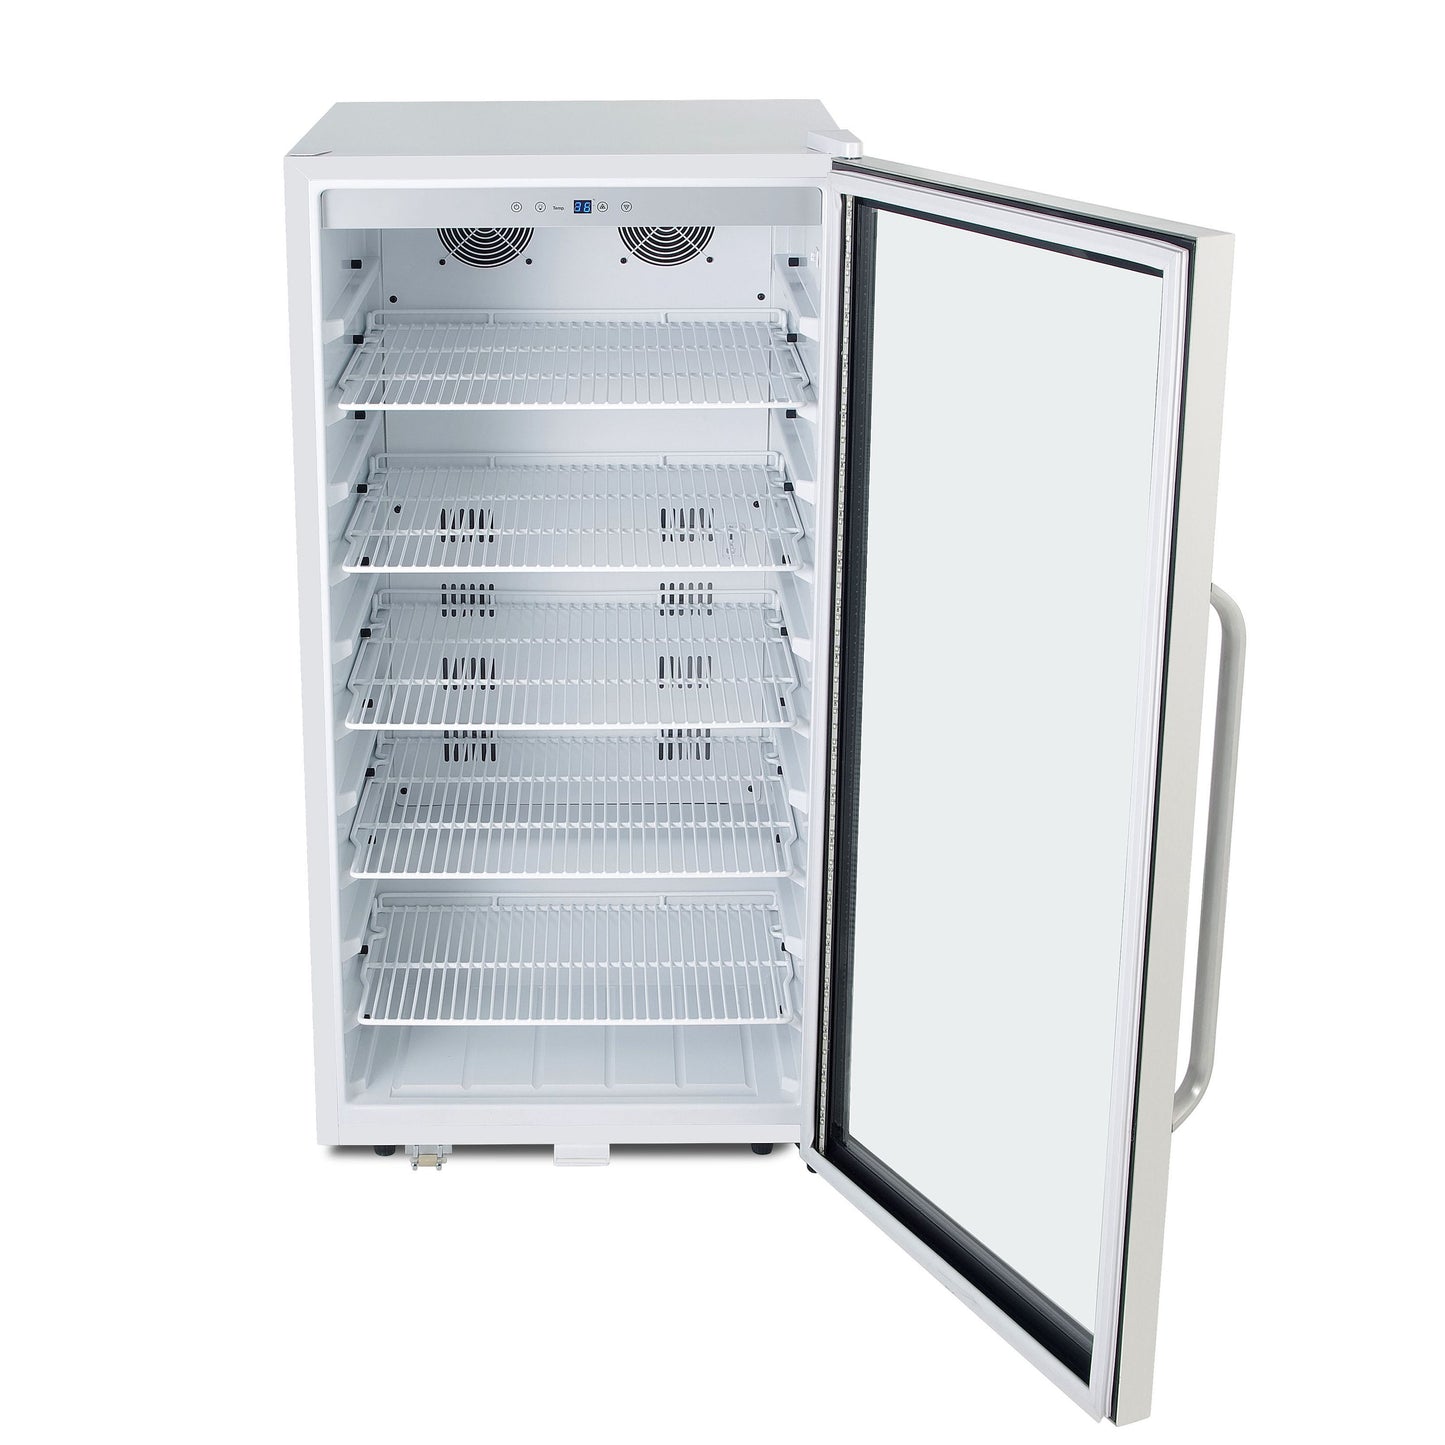 Whynter 231 Cans Freestanding 8.1 cu. ft. Stainless Steel Commercial Beverage Merchandiser Refrigerator with Superlit Door and Lock – White